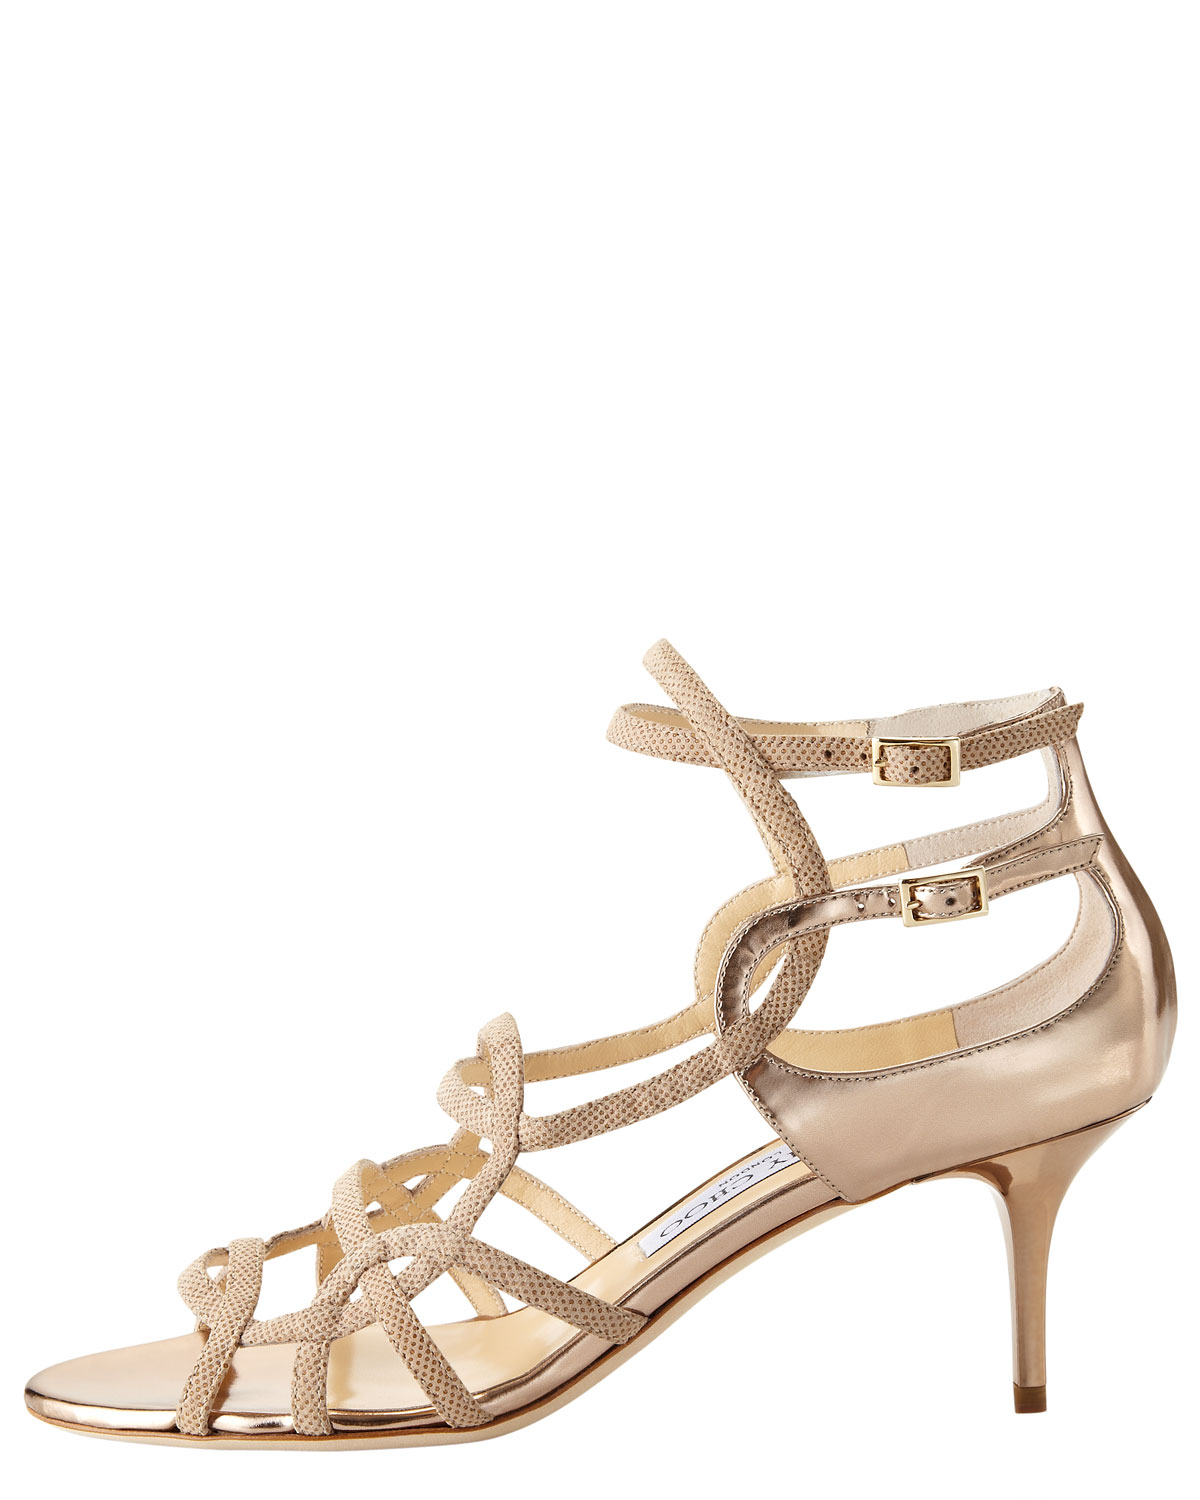 Jimmy choo Strappy Low-heel Sandal in Natural | Lyst